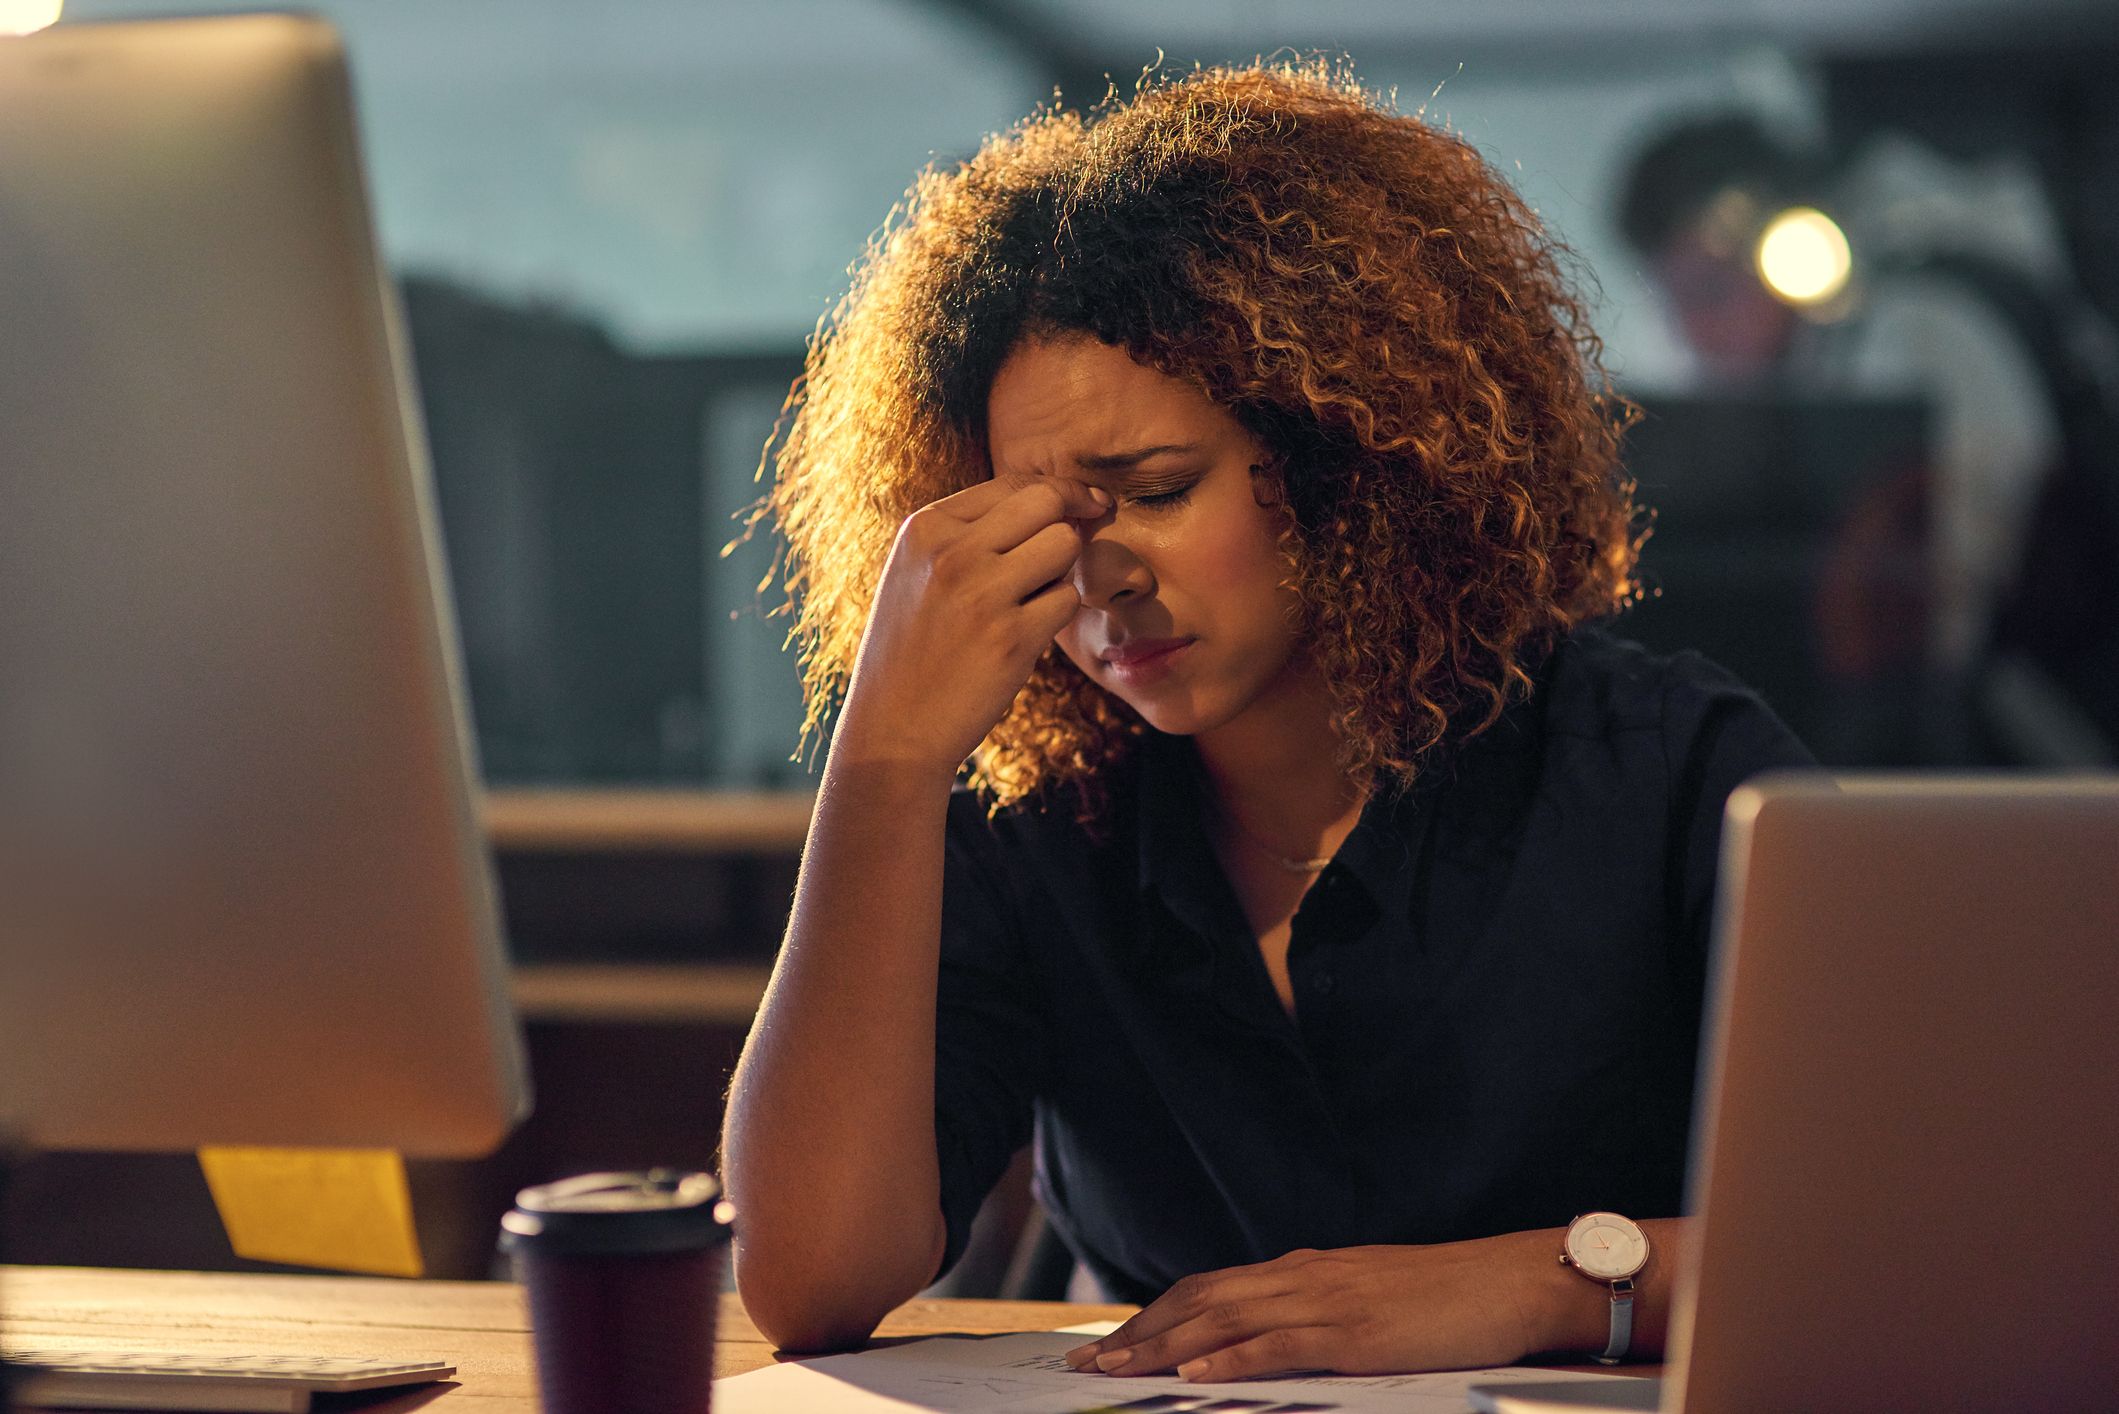 5 Tips to Be More Productive at Work While Managing Chronic Pain